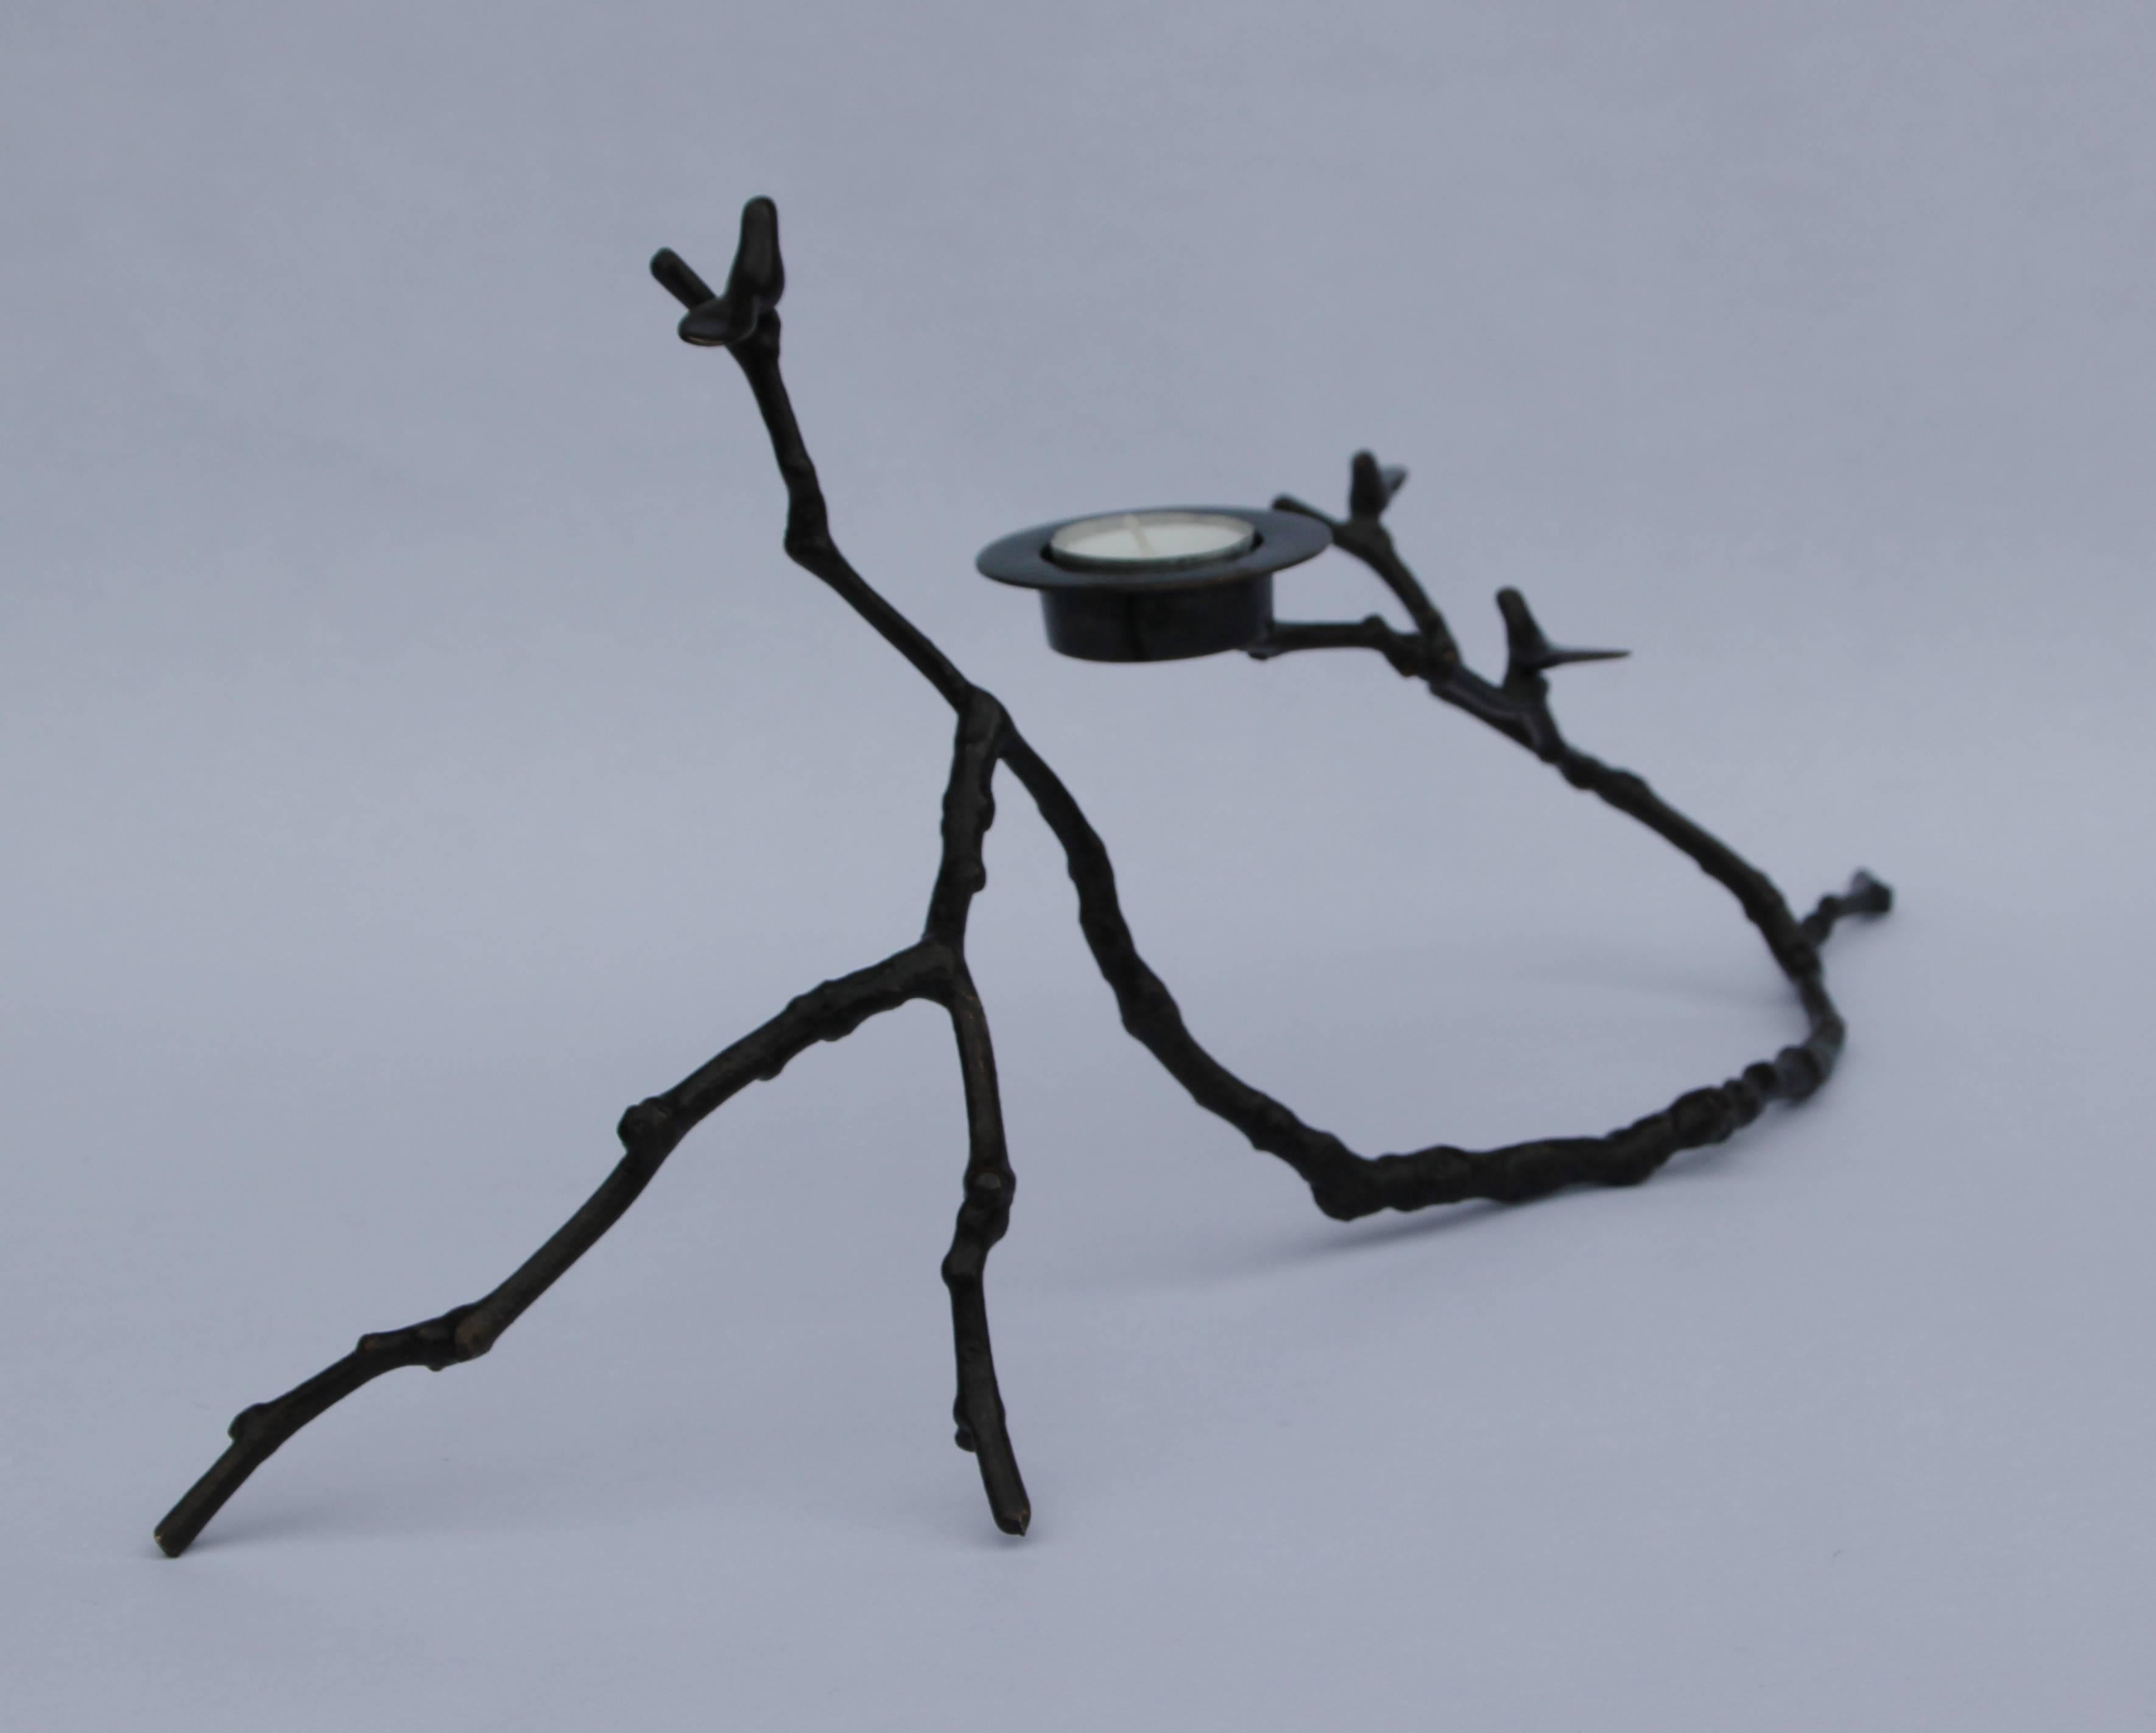 Original, unique and made of brass with a dark patina finish, creating sumptuous and unusual decorative elements for beautiful homes.

Each of these splendid patina Magnolia Twig T-light holders is handmade individually with incredible detail.